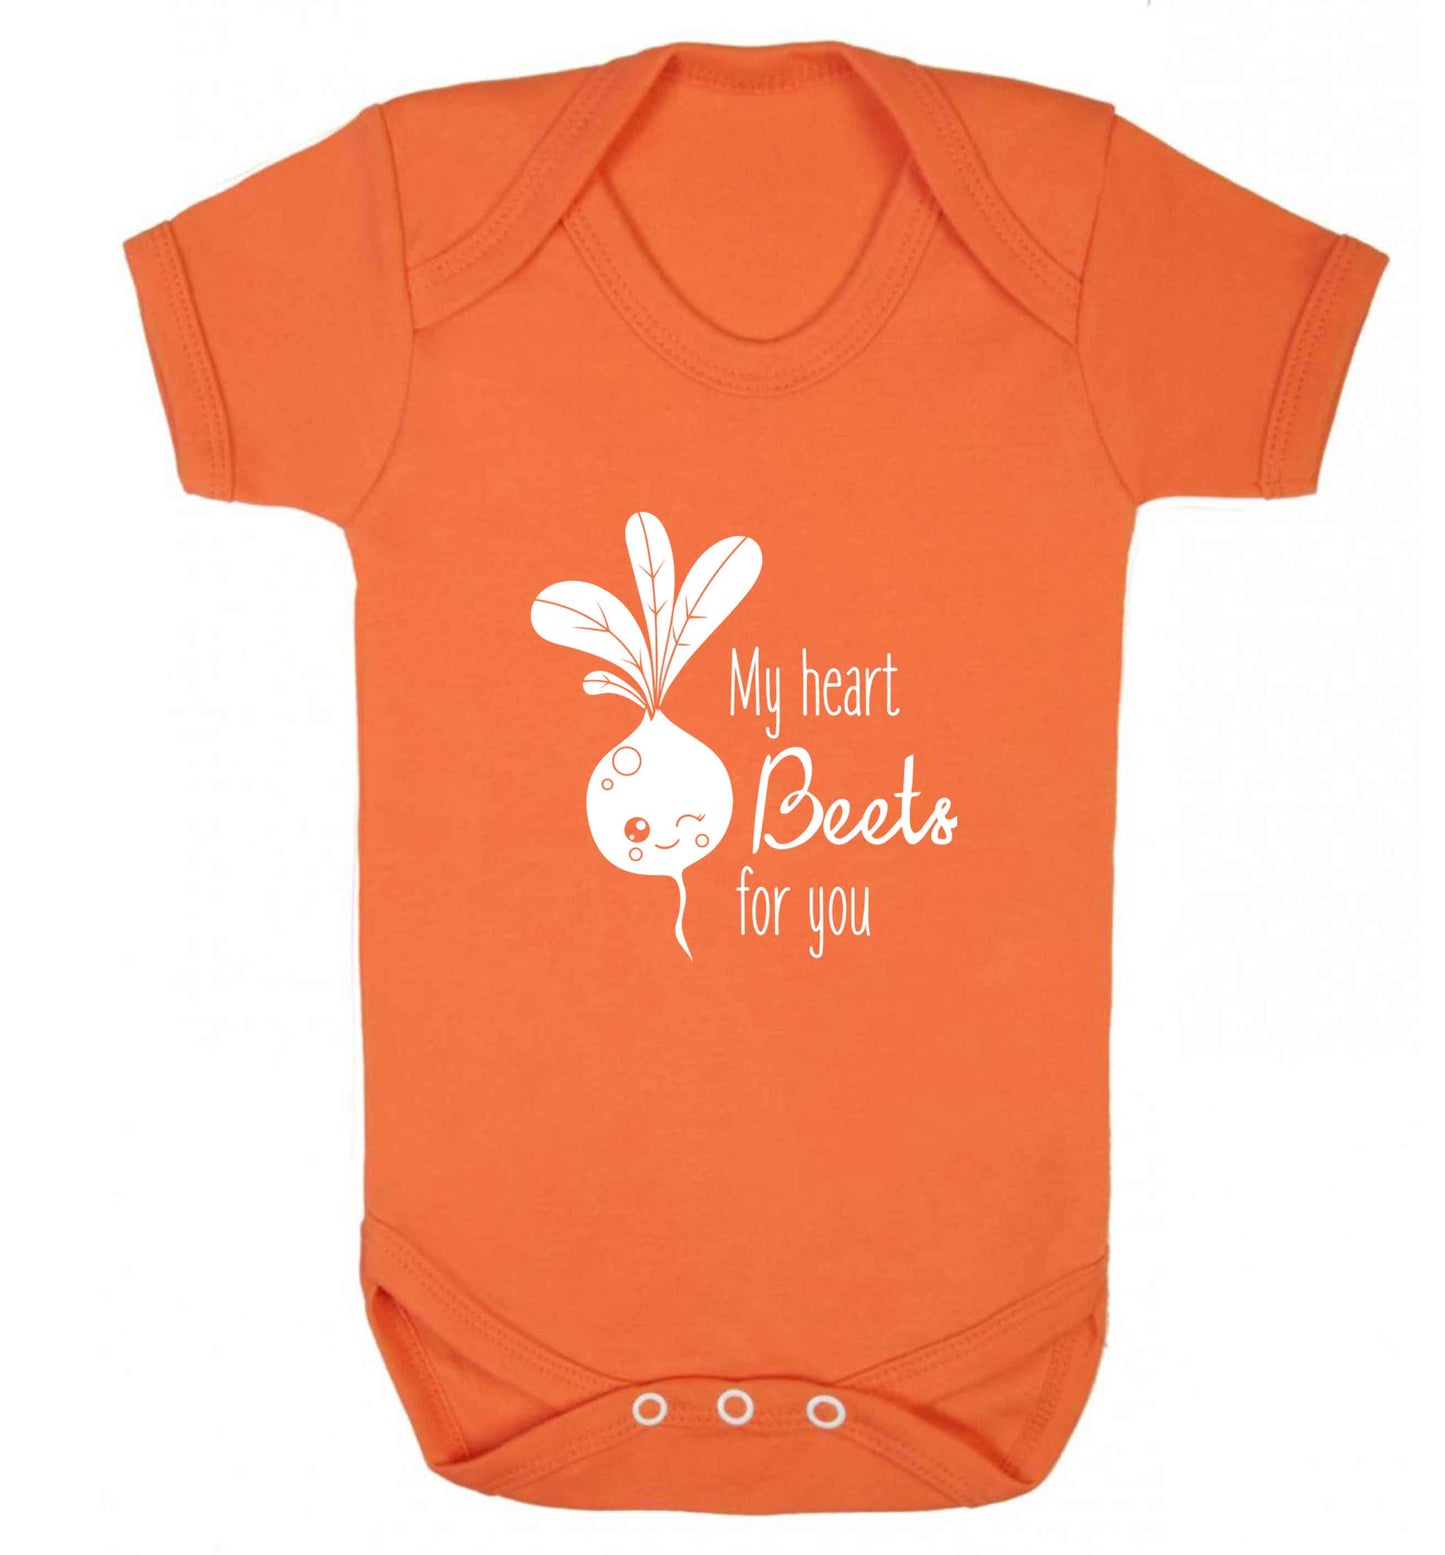 My heart beets for you baby vest orange 18-24 months